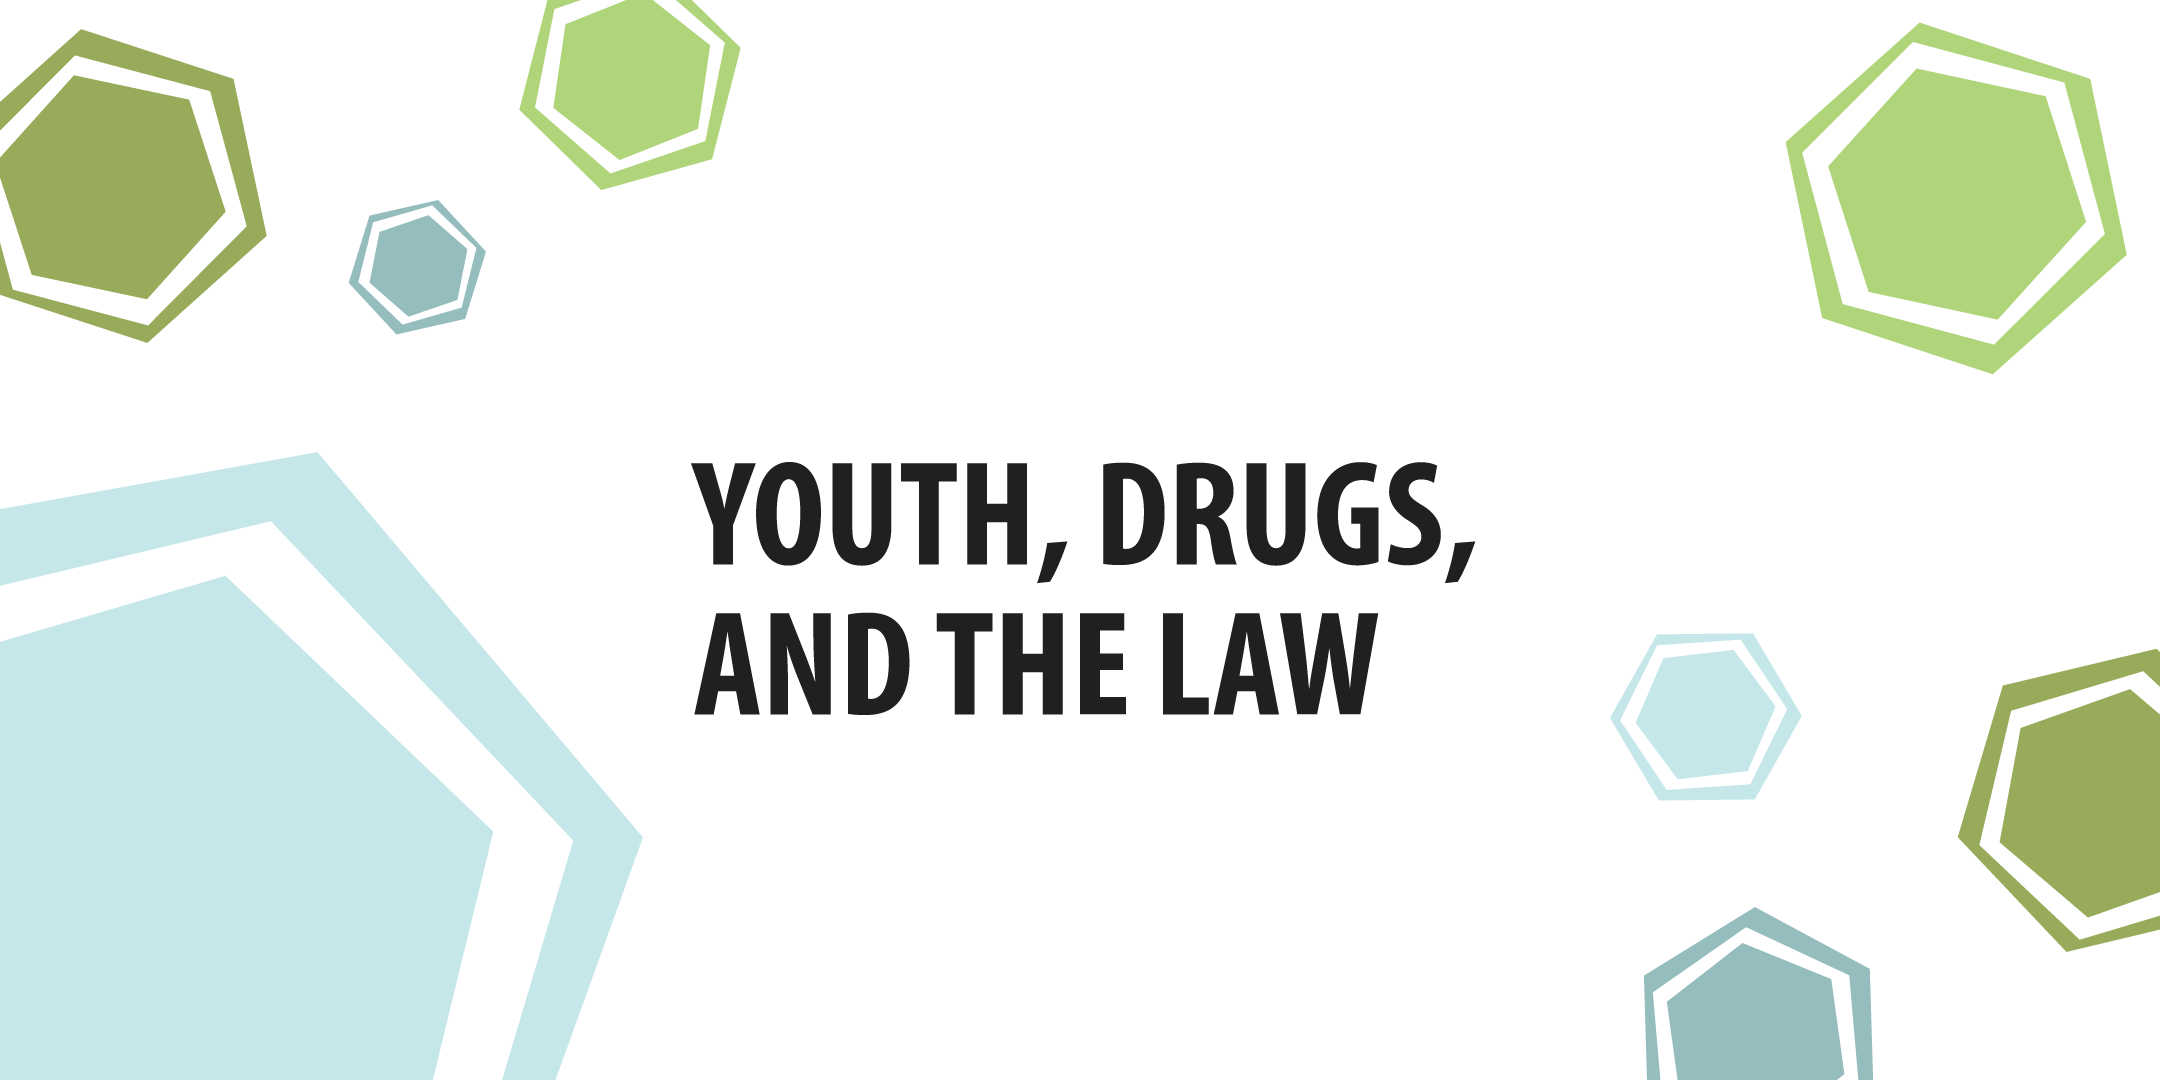 youth, drugs, and the law